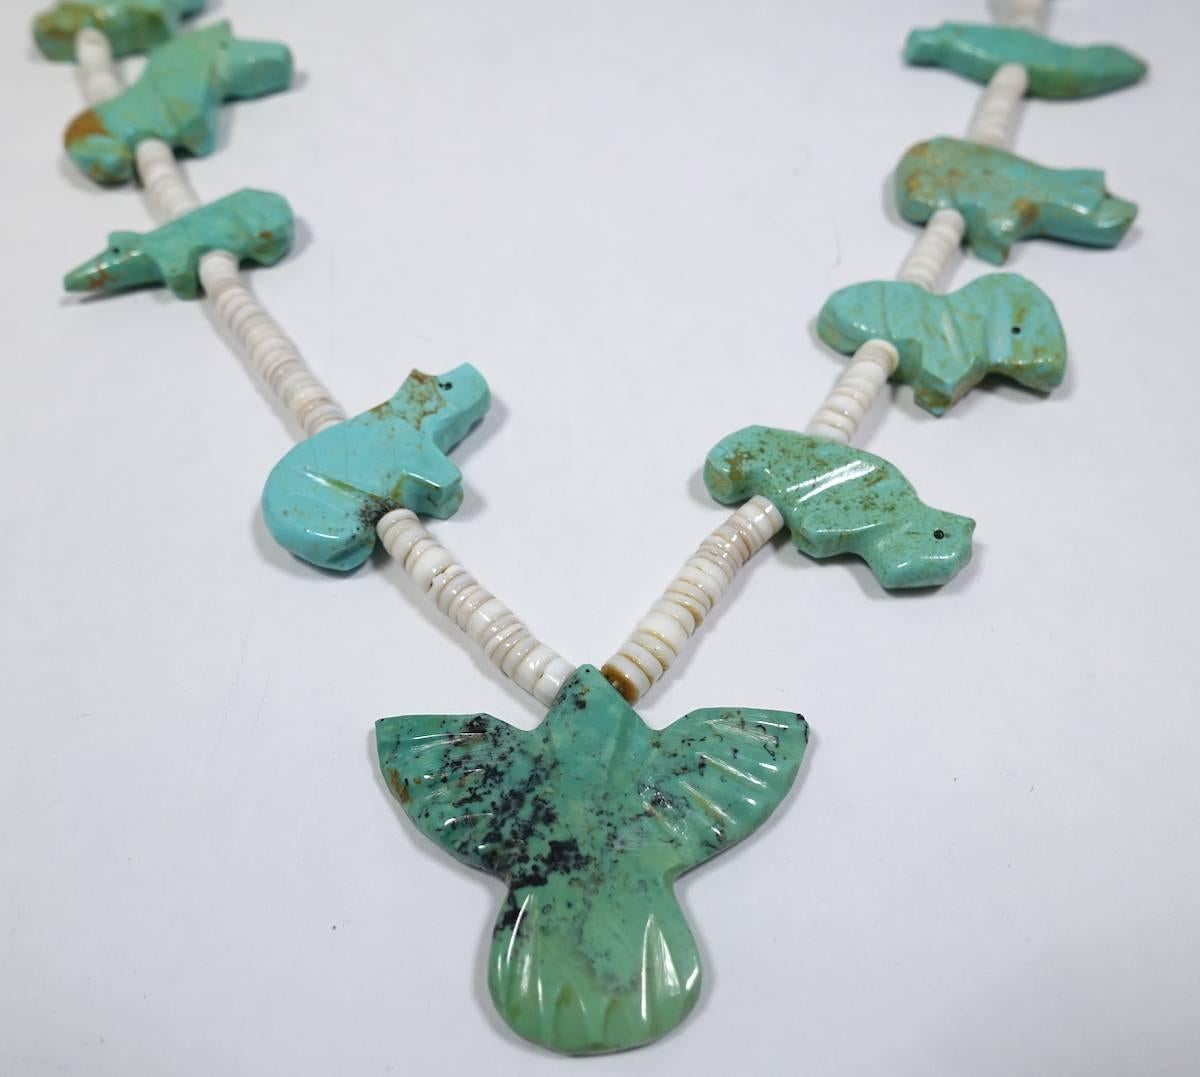 This rare, vintage fetish necklace features huge turquoise fetish.  It has a silver latch that was added on years later.  This piece measures 22-1/2” long with a toggle closure. The rare part of this necklace is the large size of each turquoise